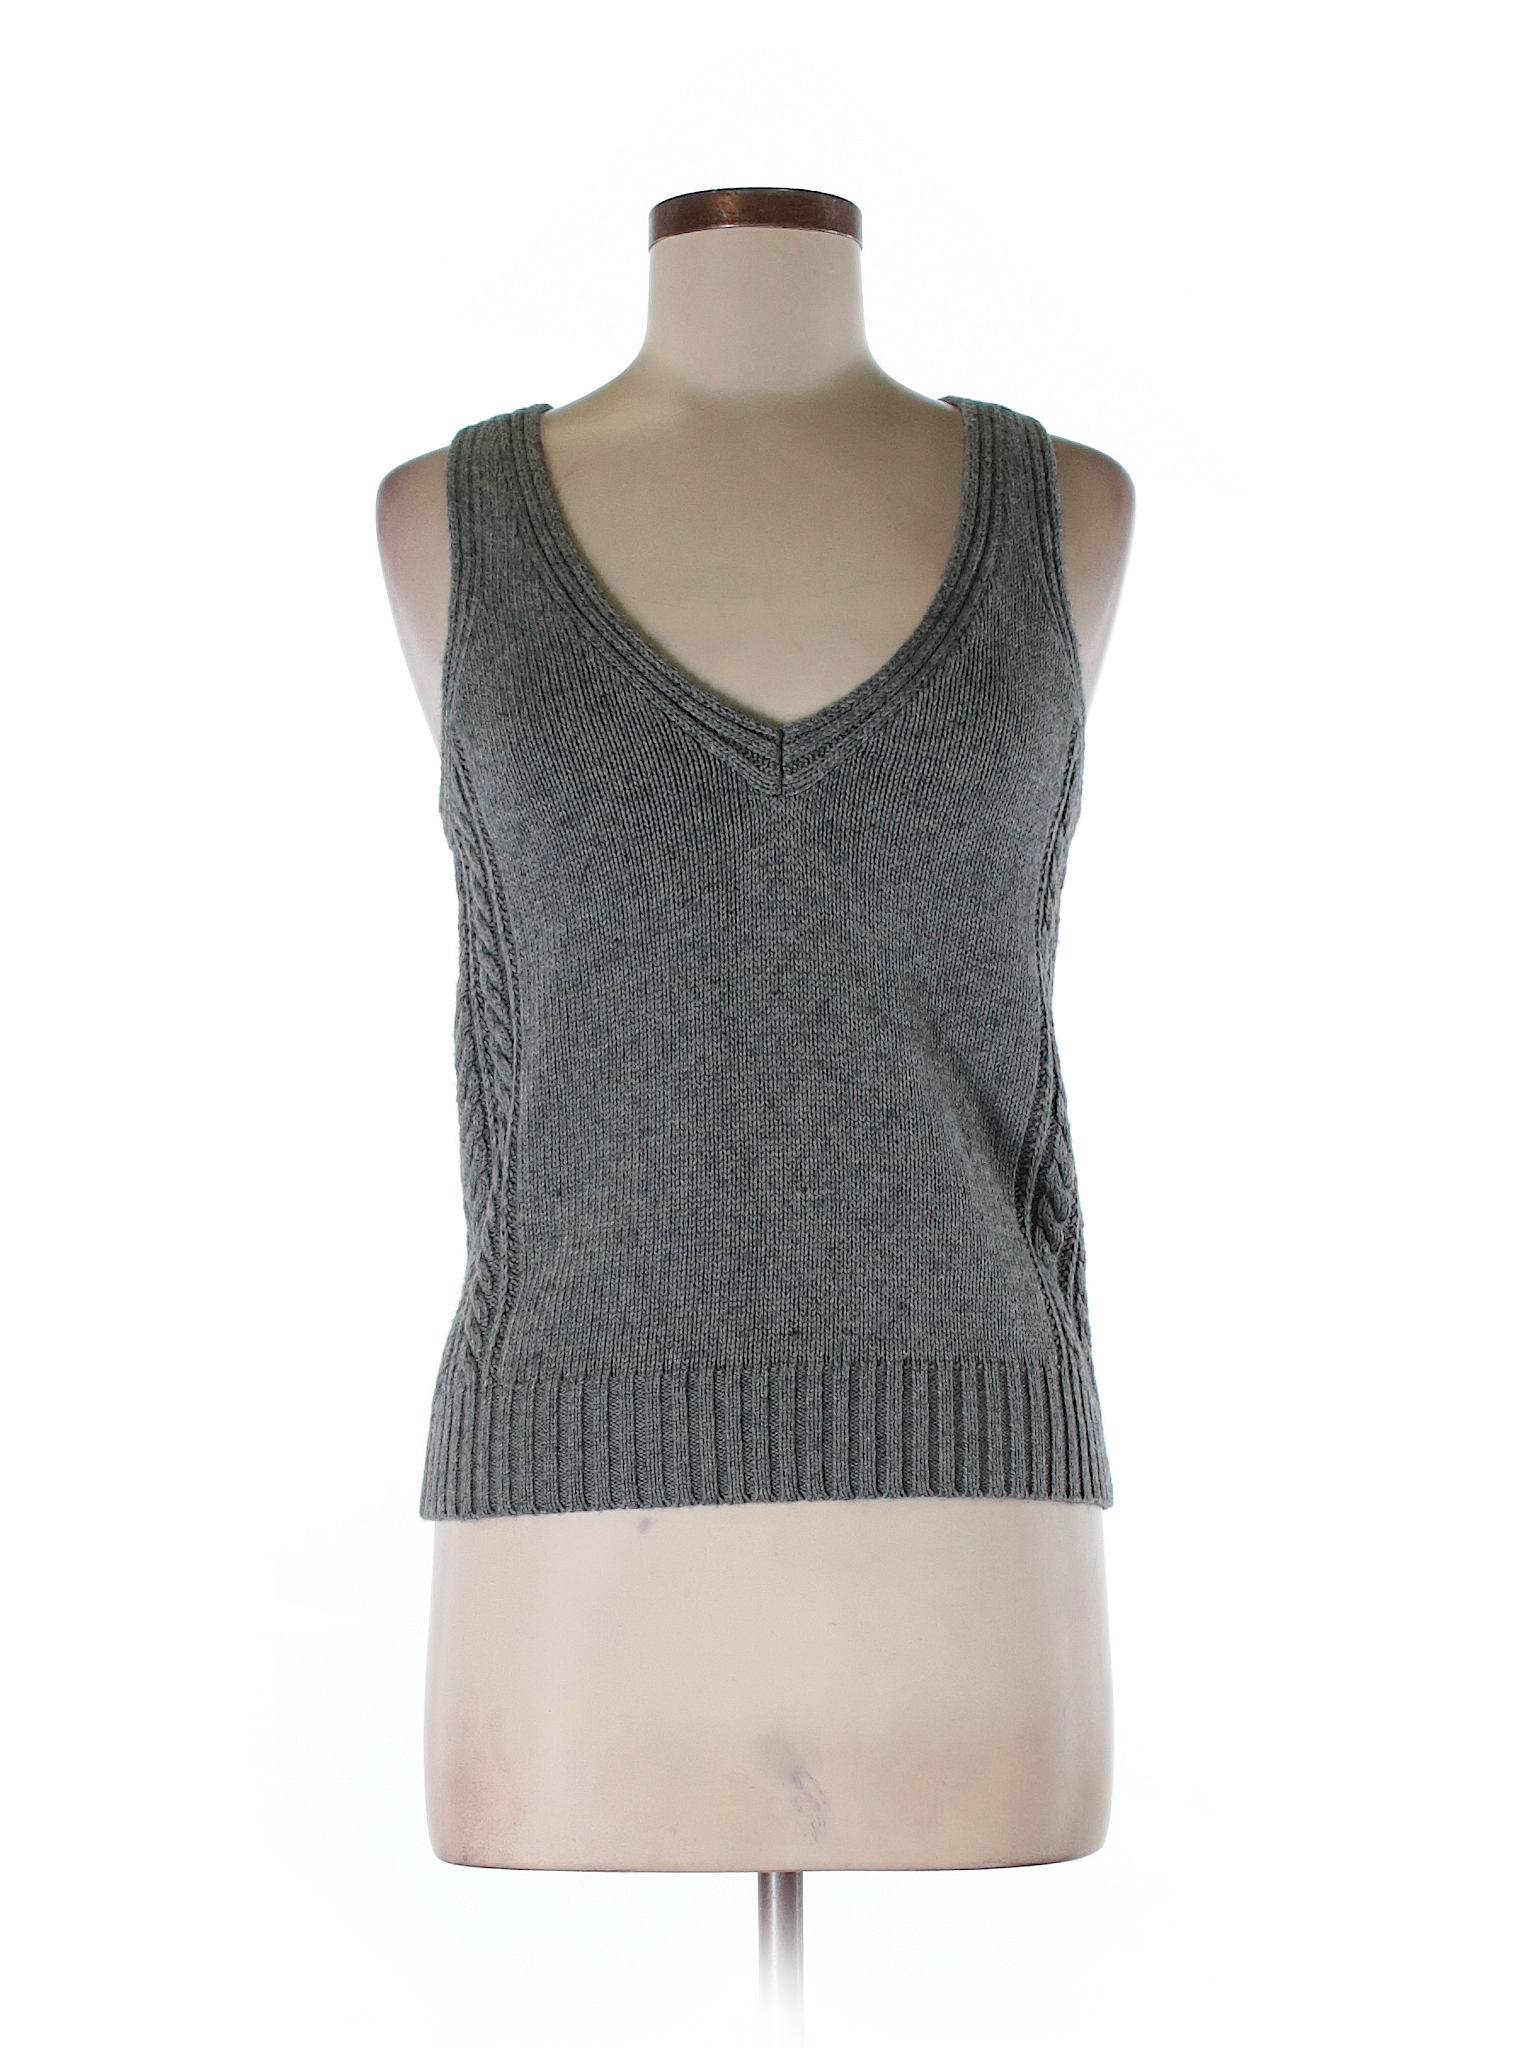 American Eagle Outfitters Solid Gray Sweater Vest Size M - 72% off ...